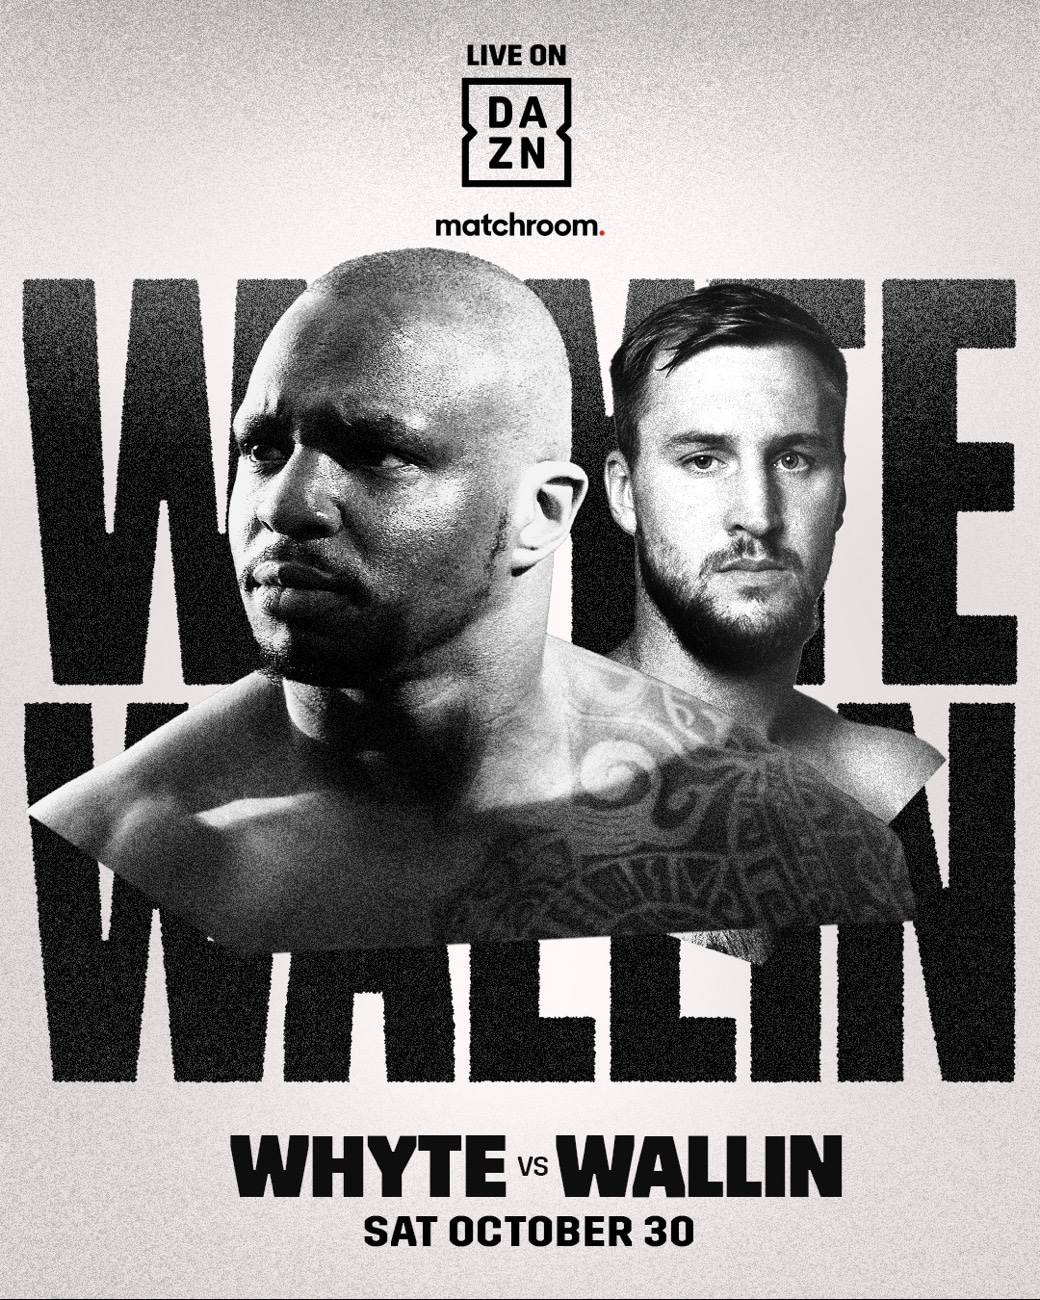 Image: Bob Arum warns Dillian Whyte to "watch out" for Otto Wallin on Oct.30th